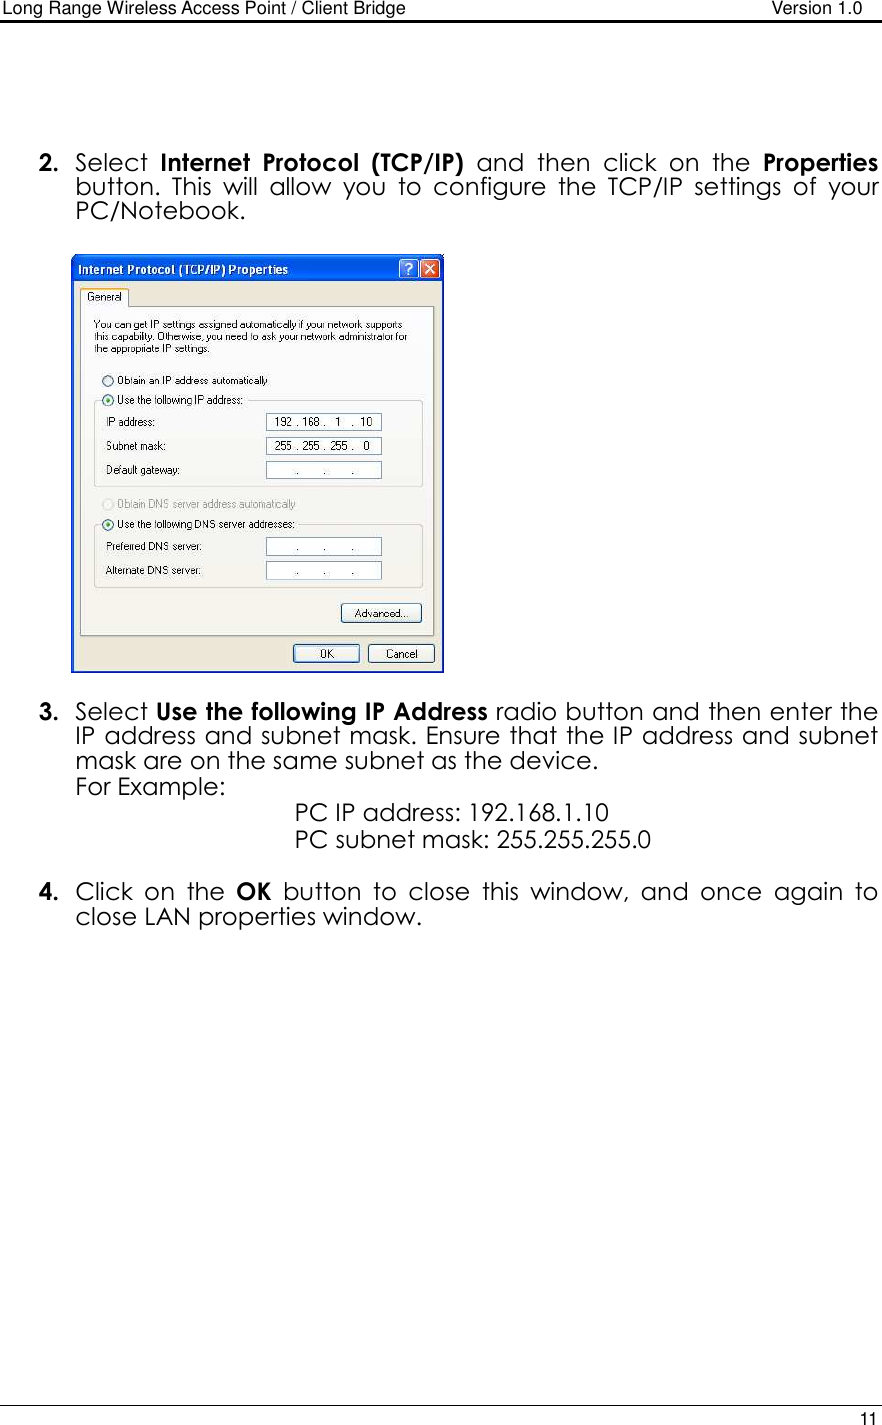 Long Range Wireless Access Point / Client Bridge                                   Version 1.0    11     2. Select  Internet  Protocol  (TCP/IP)  and  then  click  on  the  Properties button.  This  will  allow  you  to  configure  the  TCP/IP  settings  of  your PC/Notebook.                   3. Select Use the following IP Address radio button and then enter the IP address and subnet mask. Ensure that the IP address and subnet mask are on the same subnet as the device.  For Example:            PC IP address: 192.168.1.10       PC subnet mask: 255.255.255.0  4. Click  on  the  OK  button  to  close  this  window,  and  once  again  to close LAN properties window.                     